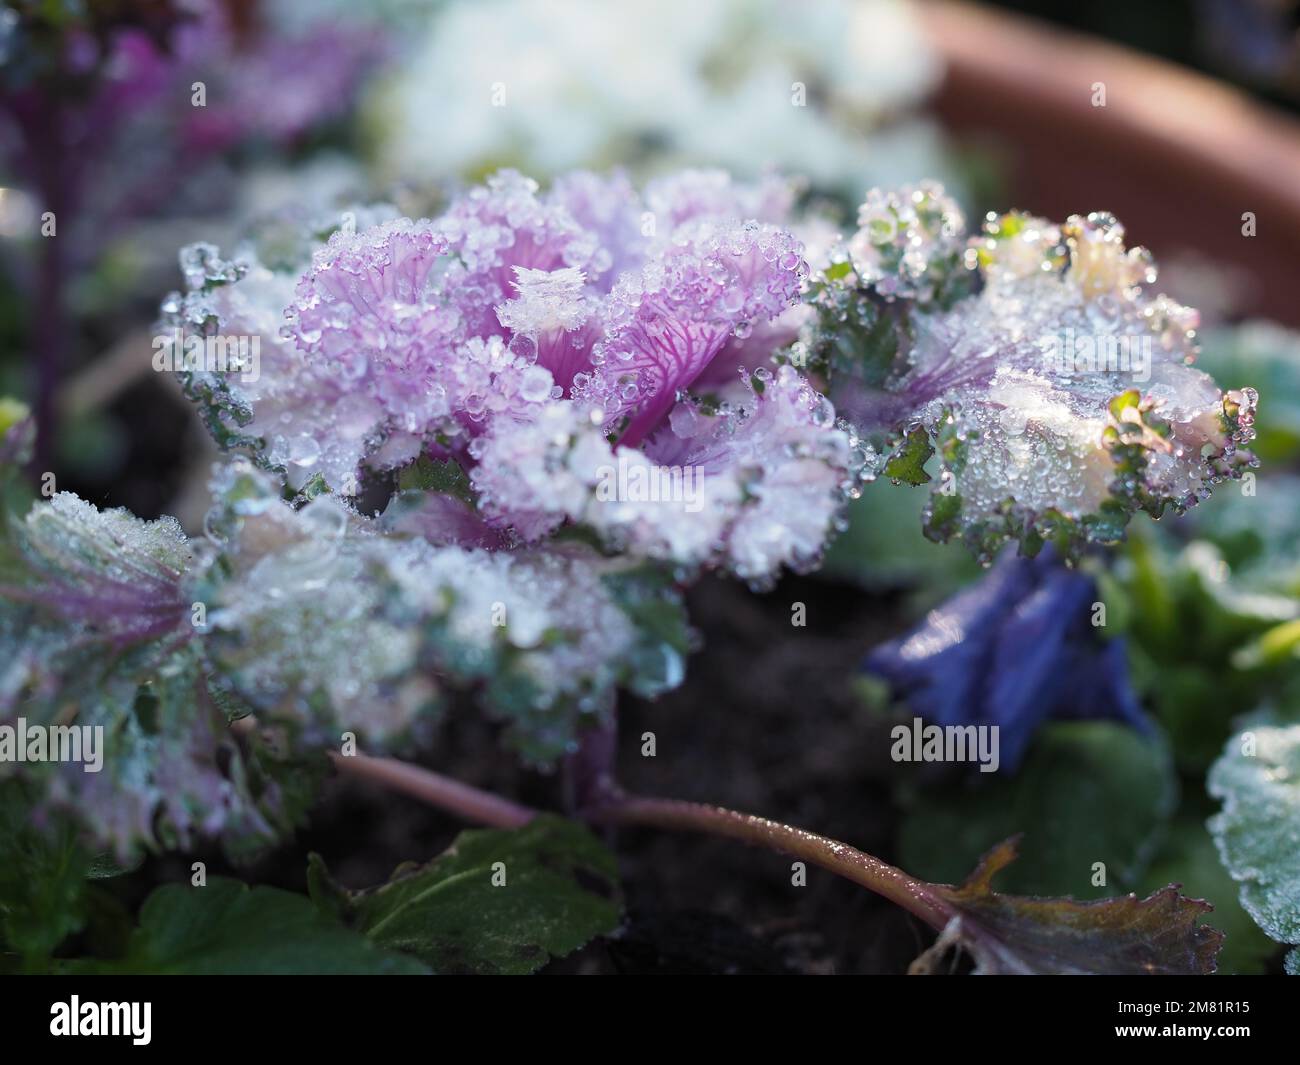 Frost covered ornamental cabbage / flowering kale leaves close up showing ice crystals Stock Photo